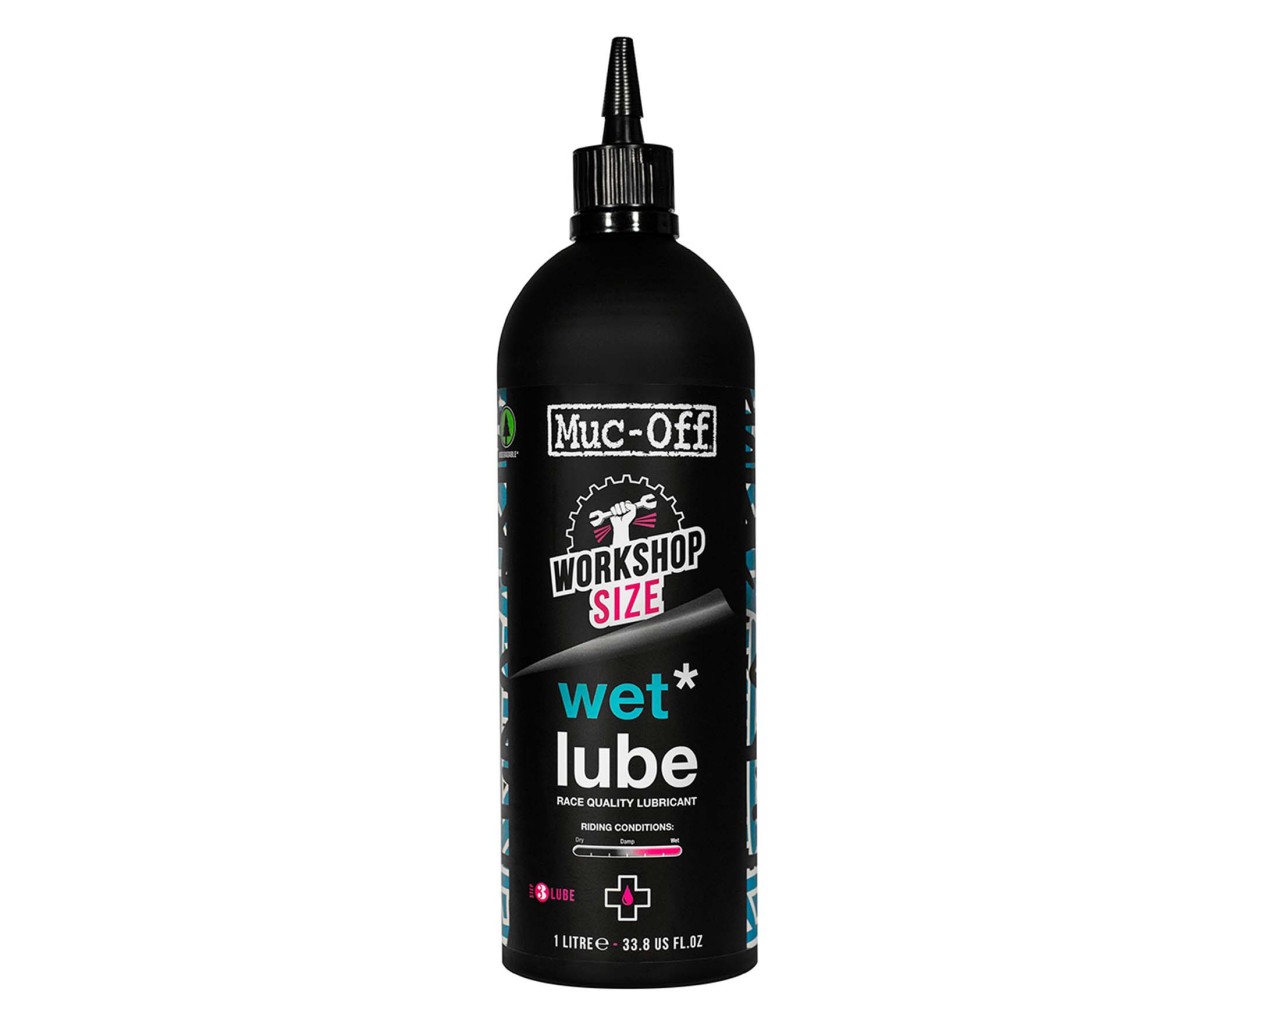 Muc-Off Wet Lube 1 litre